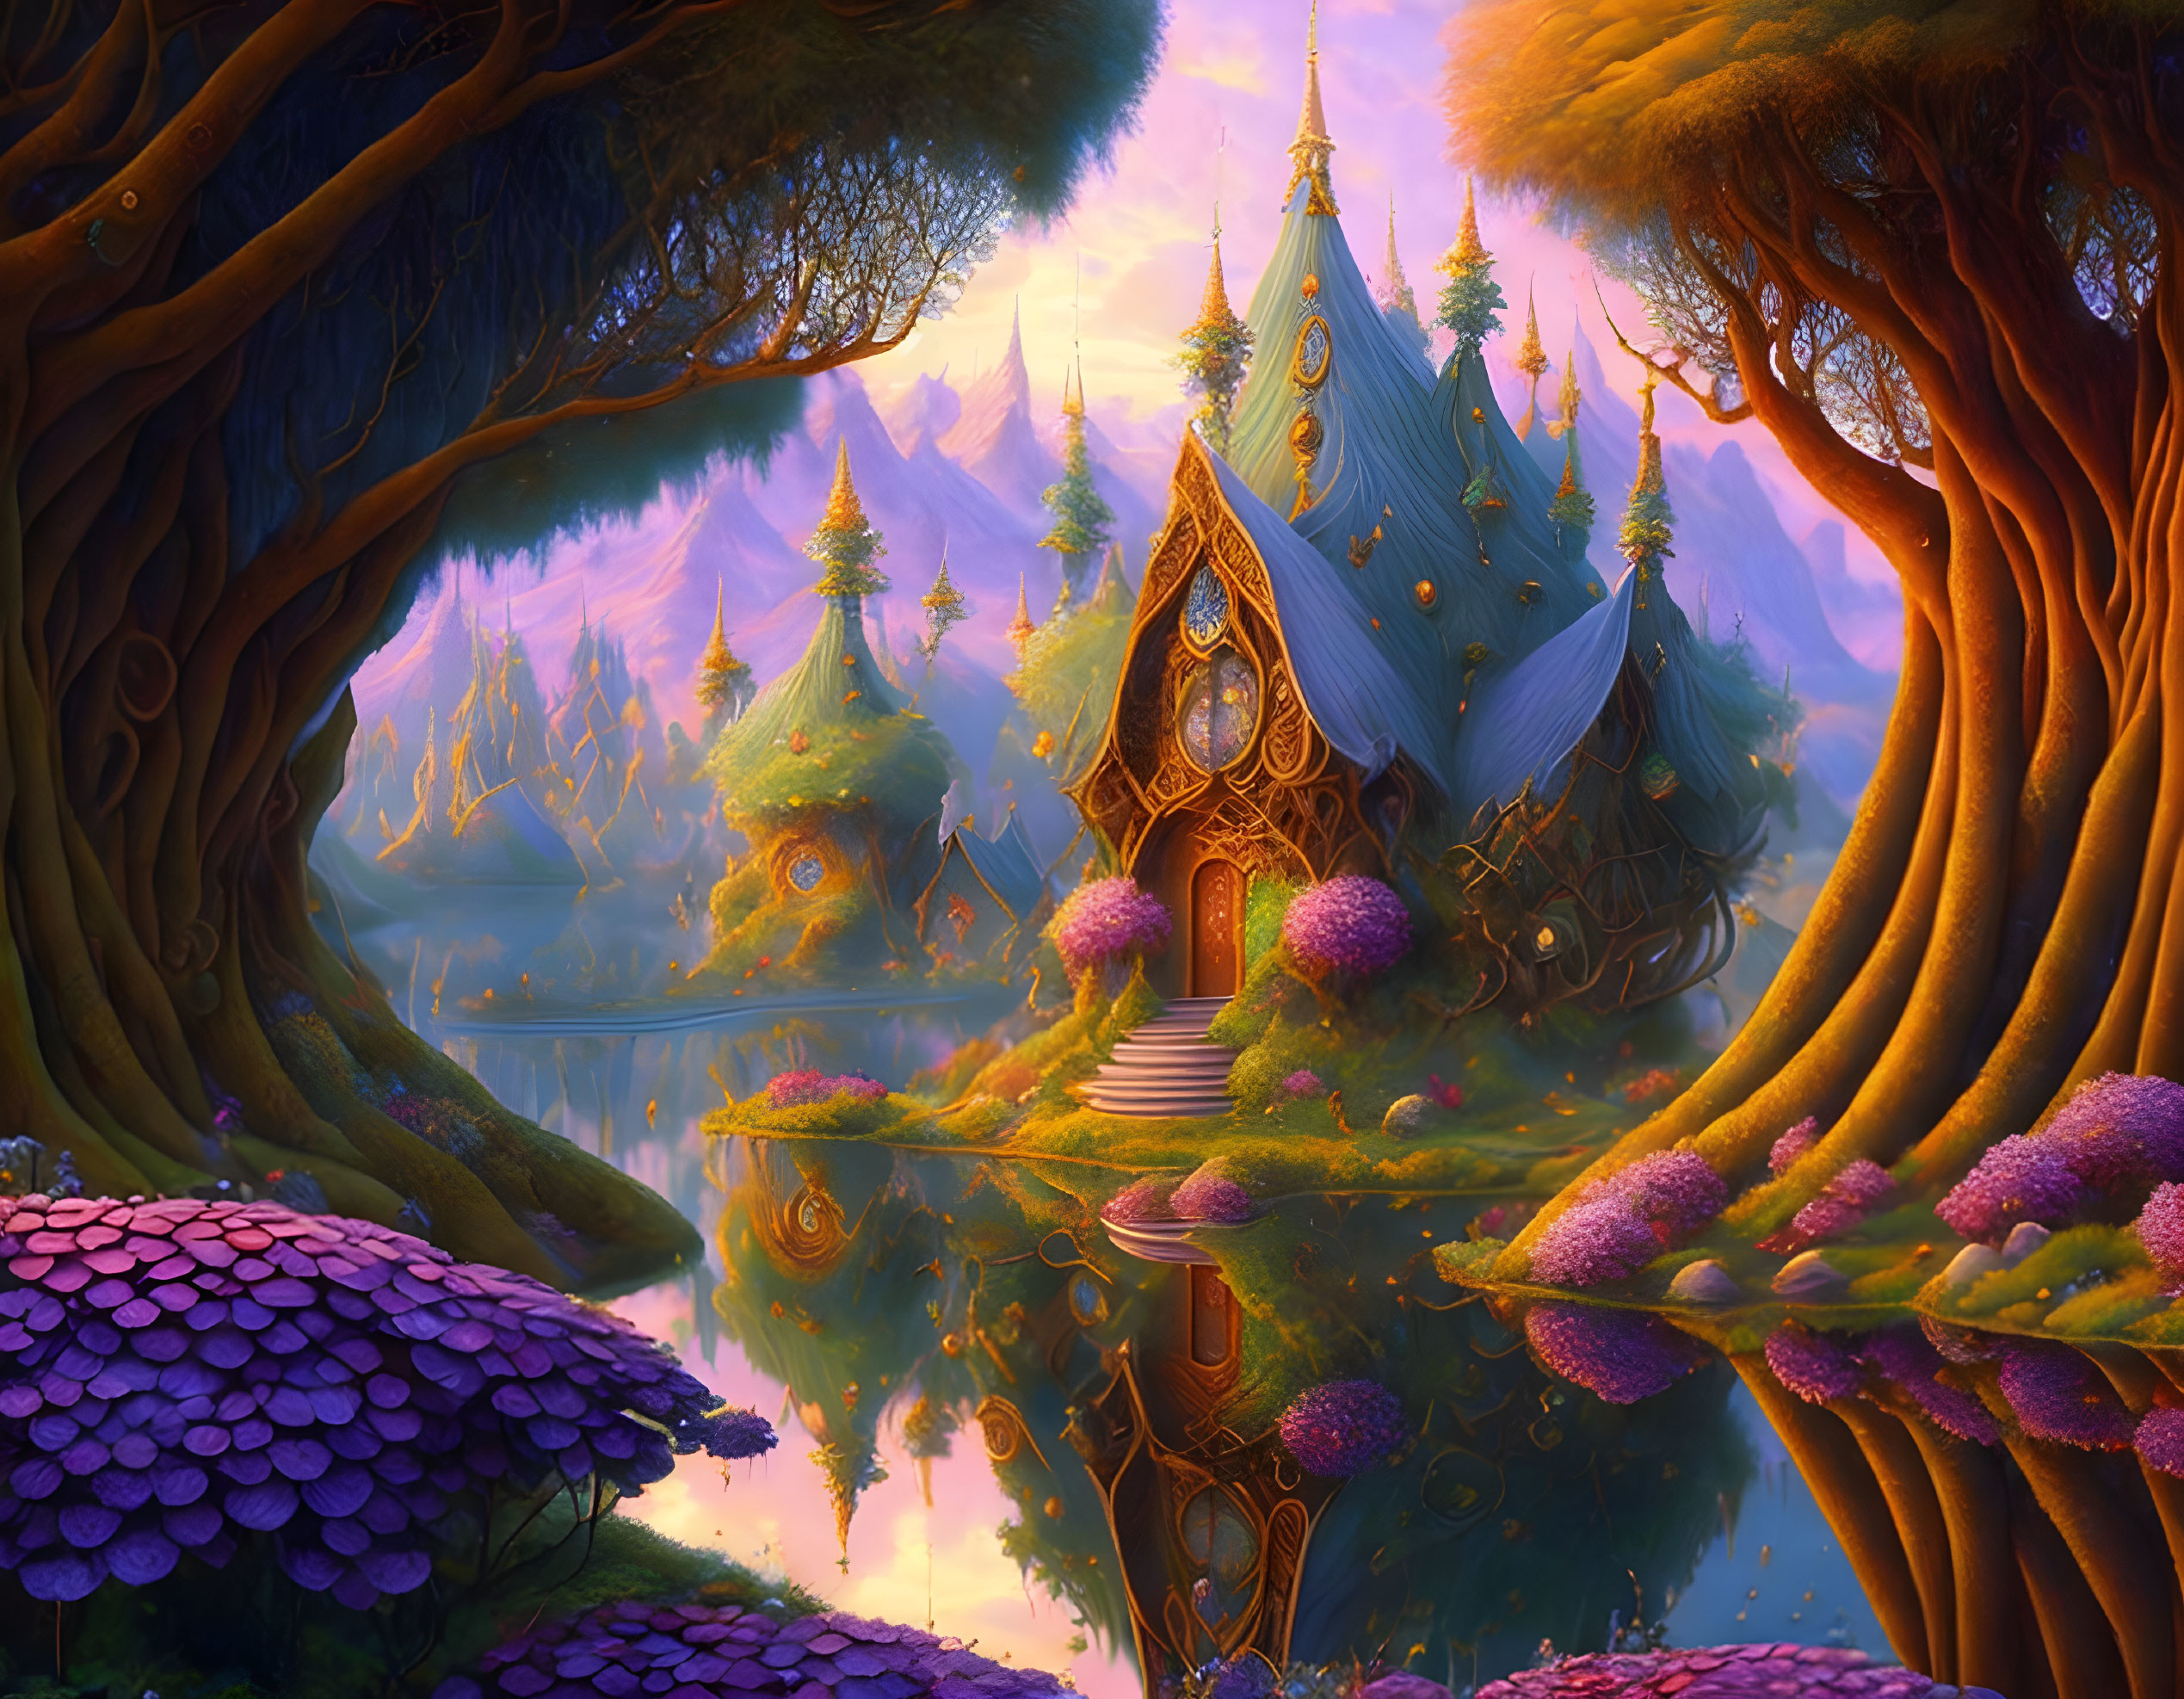 Whimsical Treehouses in Fantasy Landscape at Twilight